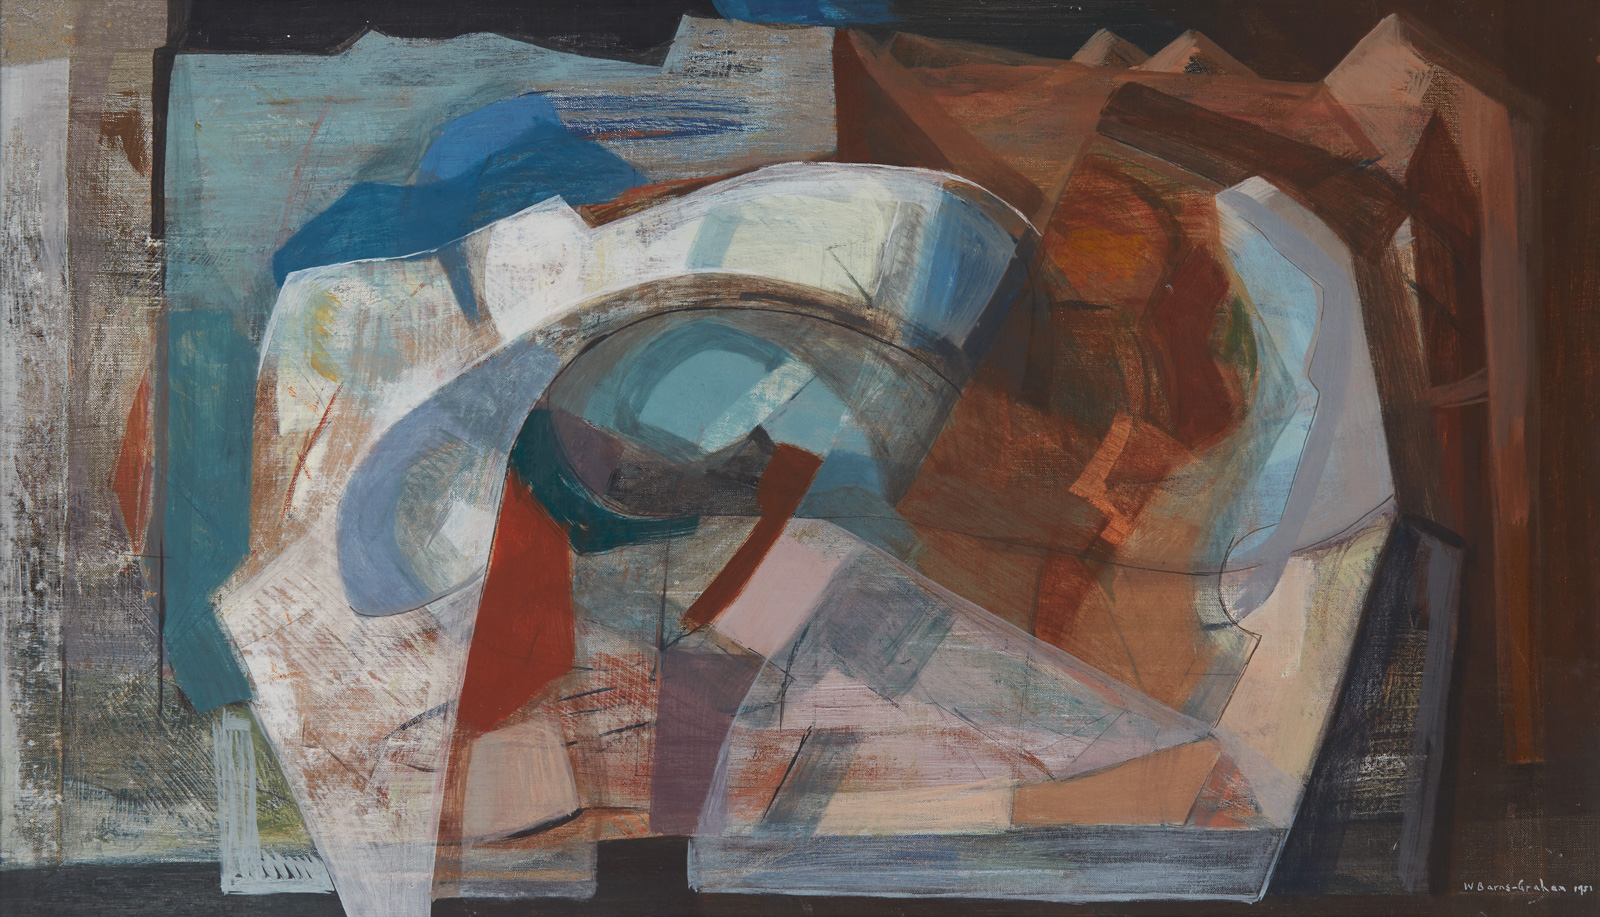 An oil painting of abstract geometric forms in white, blues, reds and browns represent an ice cavern